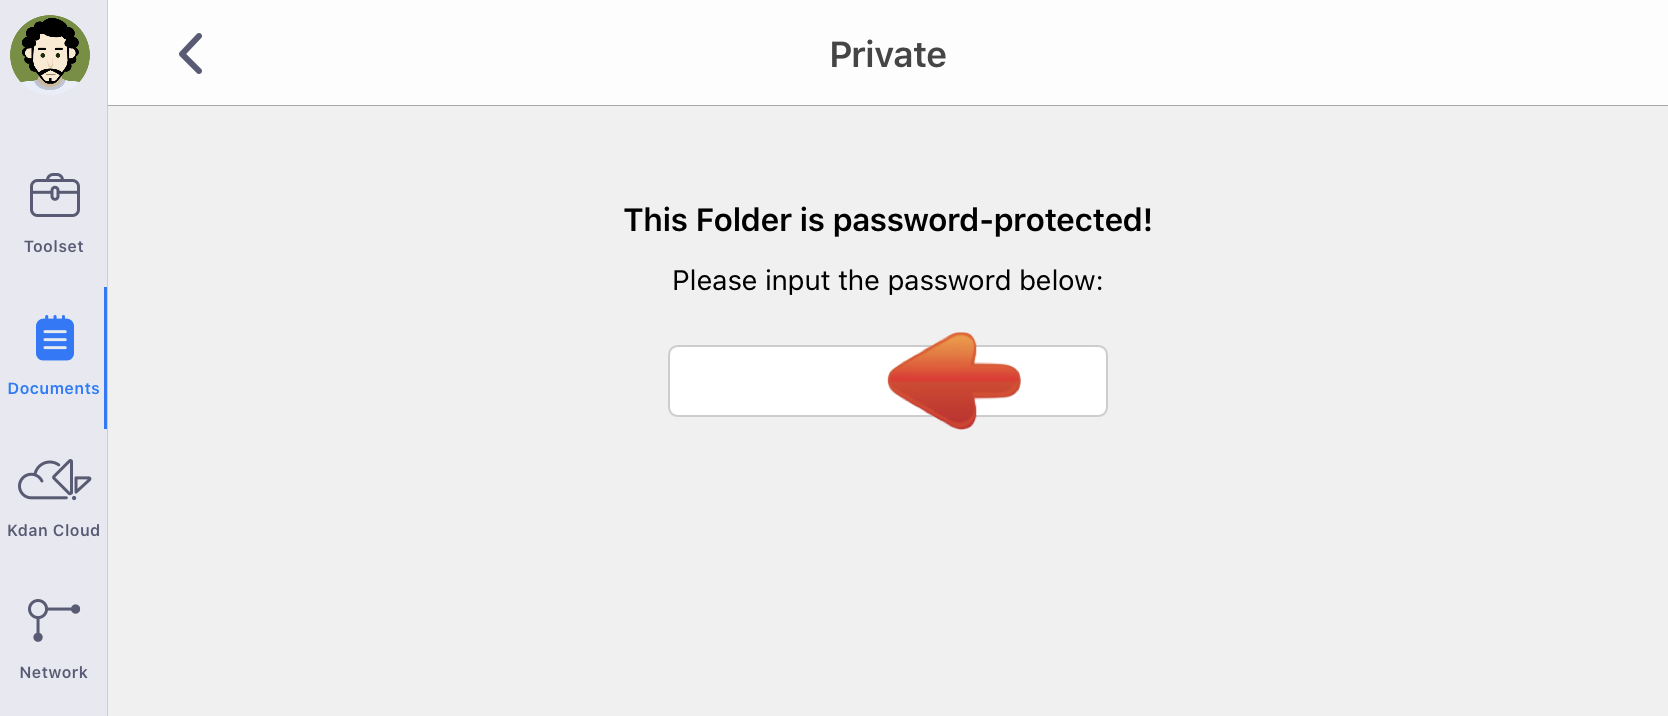 Private_folder_Password_protected.PNG